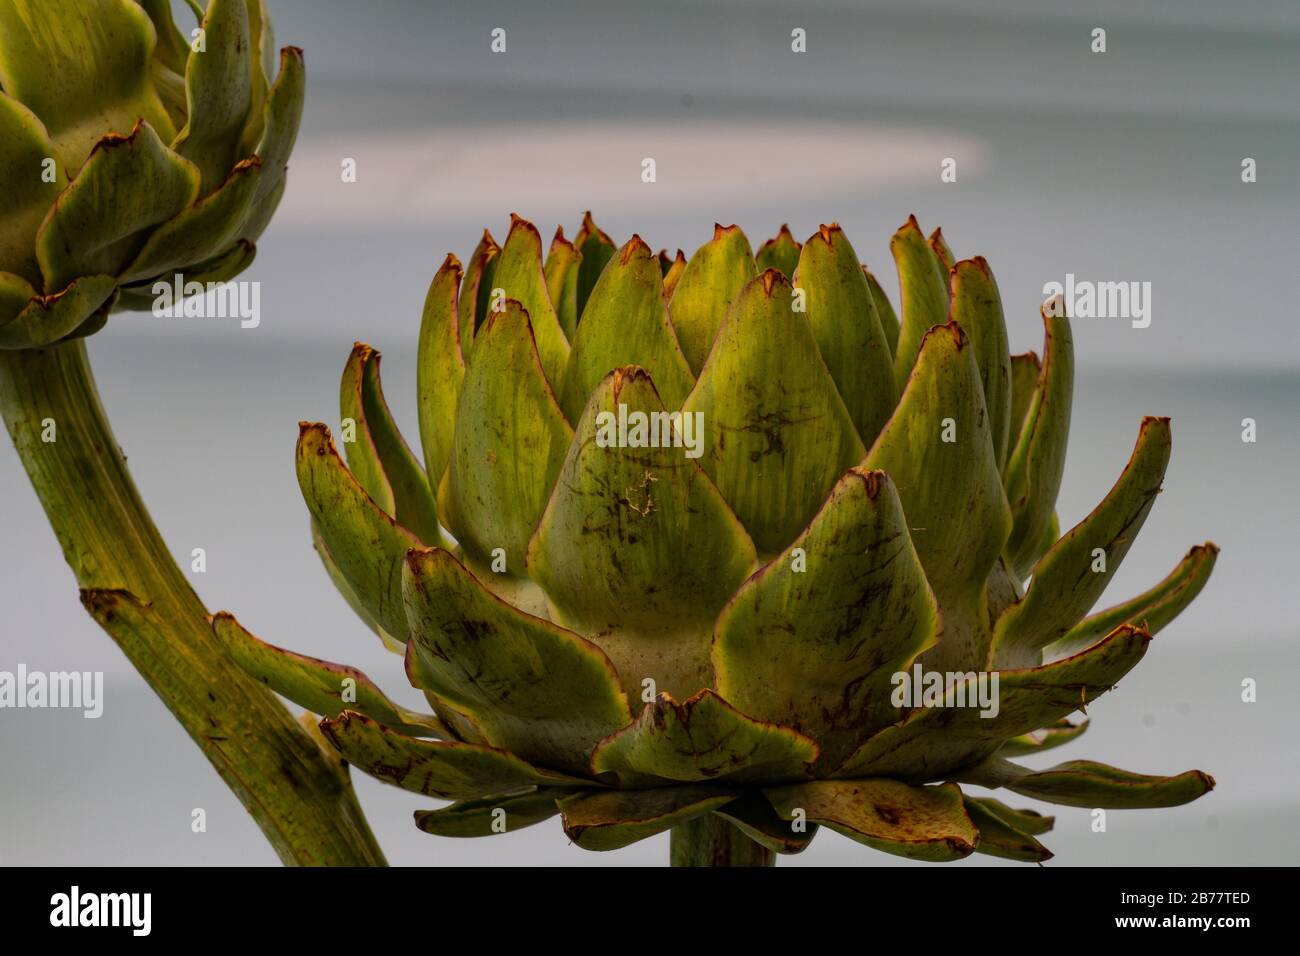 Petals of an artichoke (cynara cardunculus) in front of a gray and white structured background Stock Photo